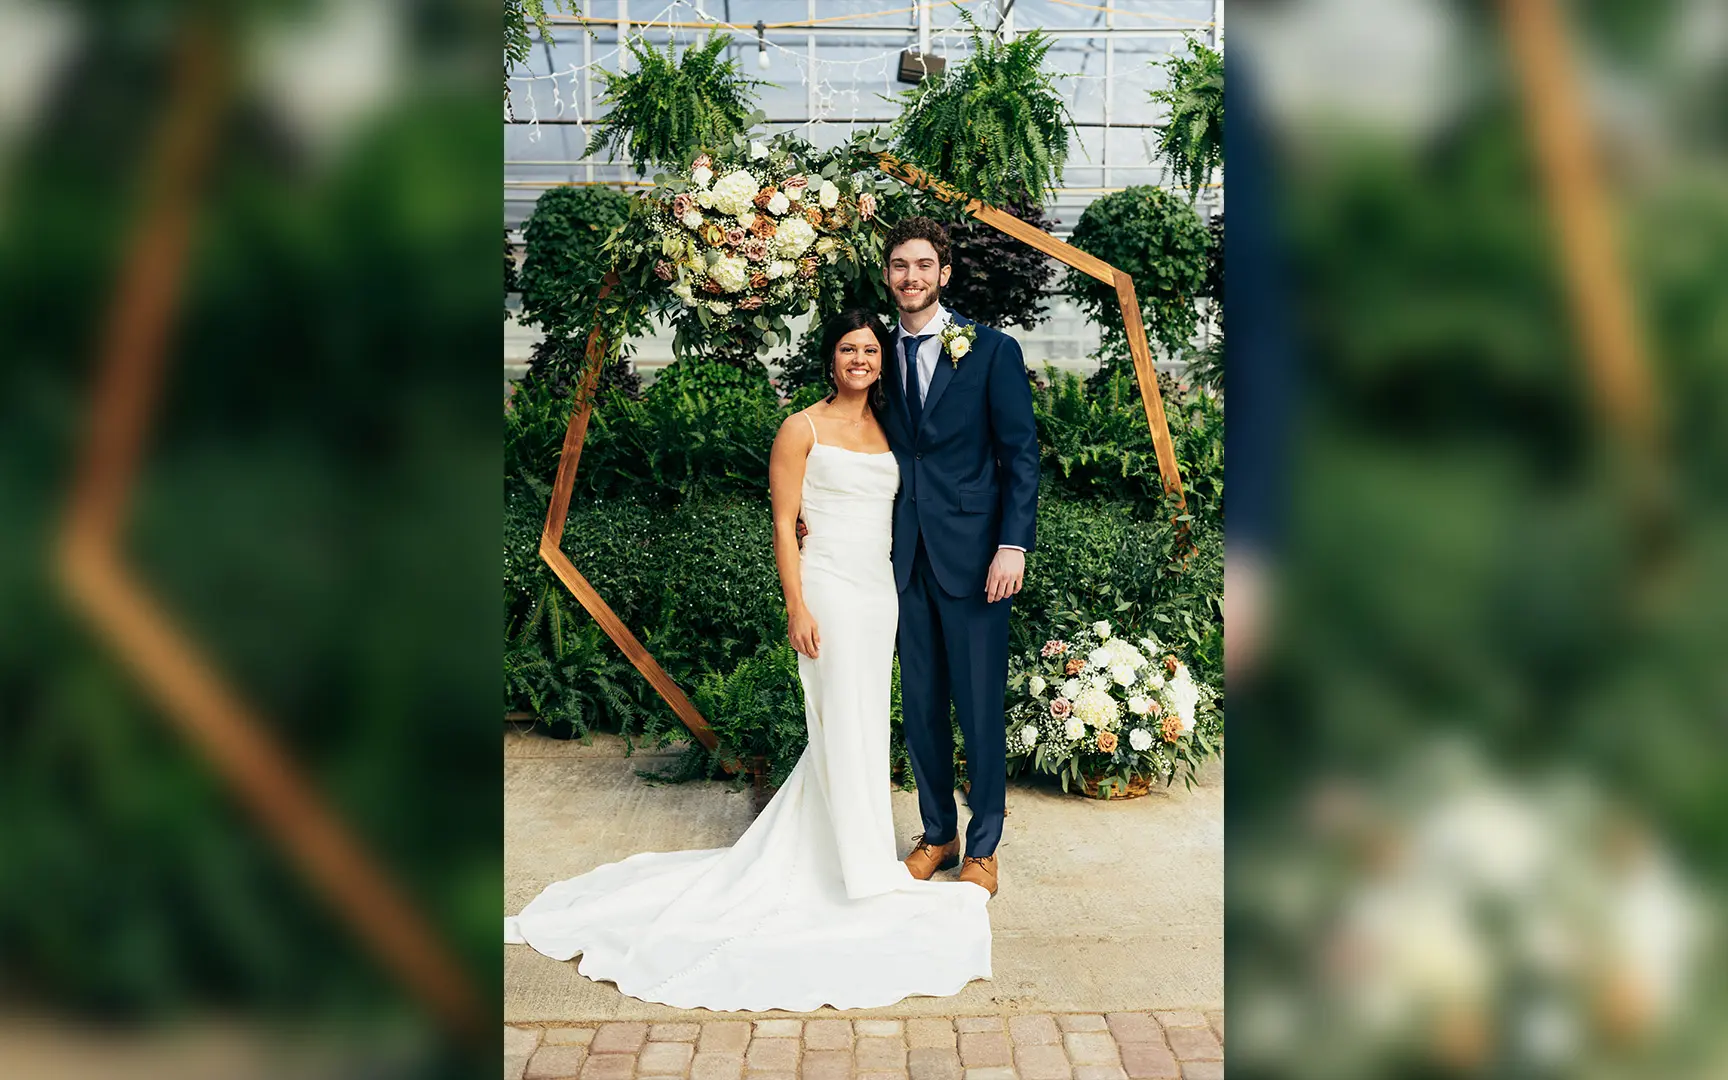 A newlywed couple posing under a floral arch in a greenhouse, the bride in a white dress and the groom in a blue suit.